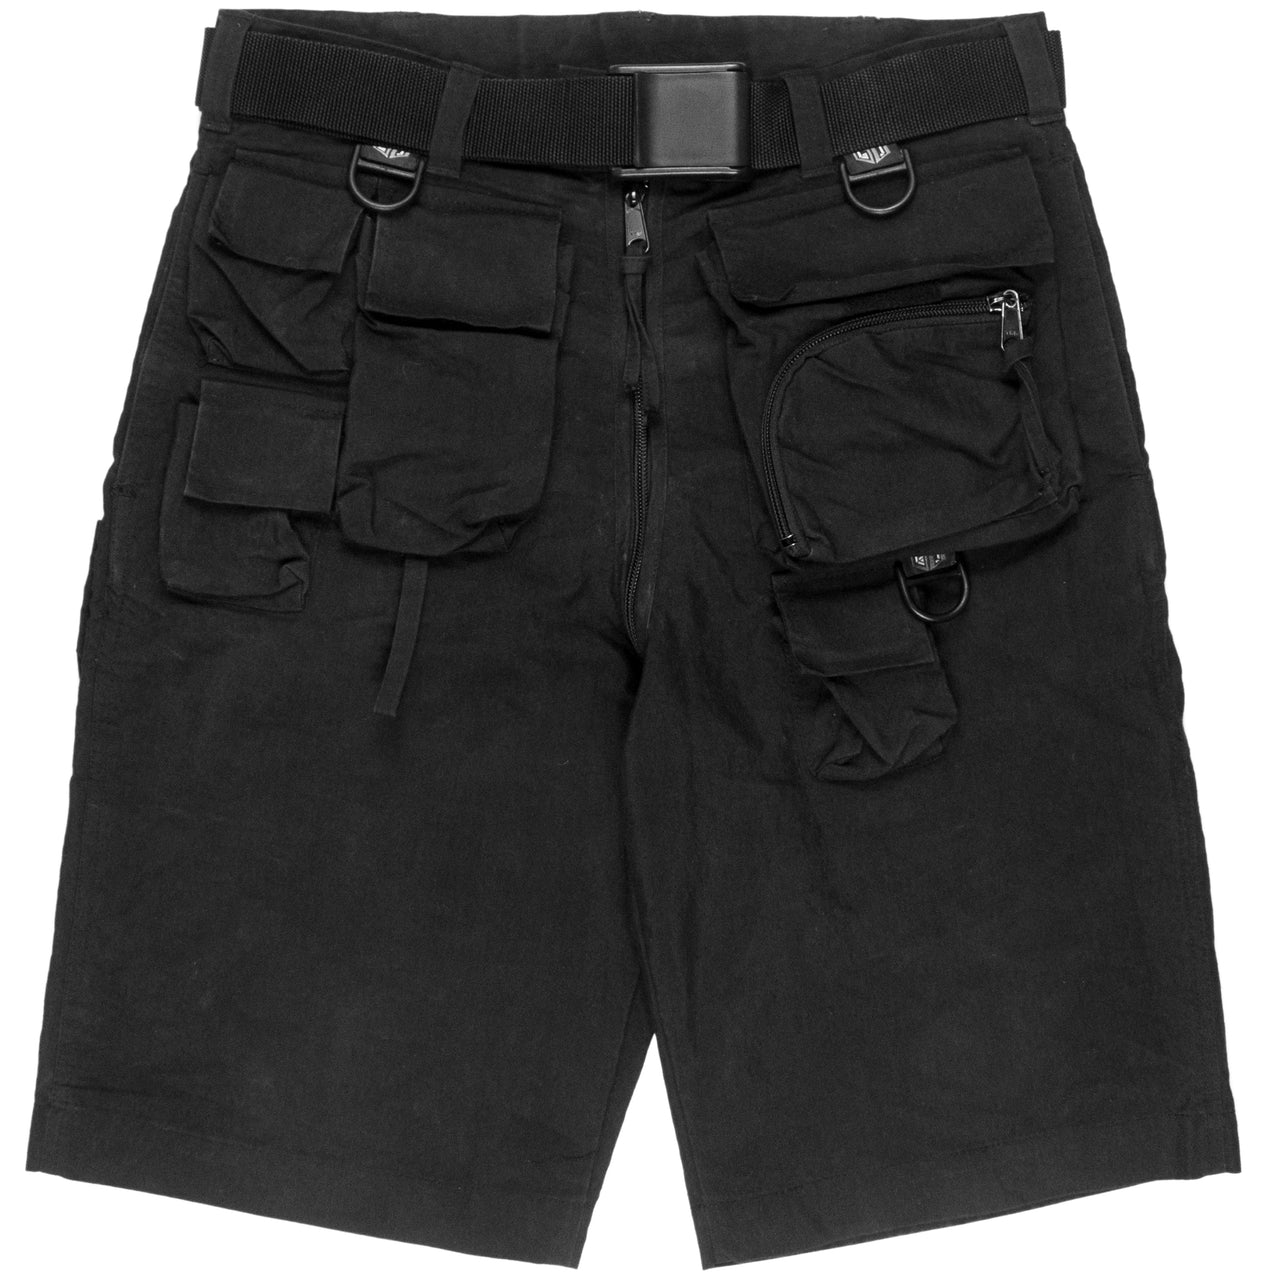 General Research Multi-Pocket Cargo Shorts - 1999